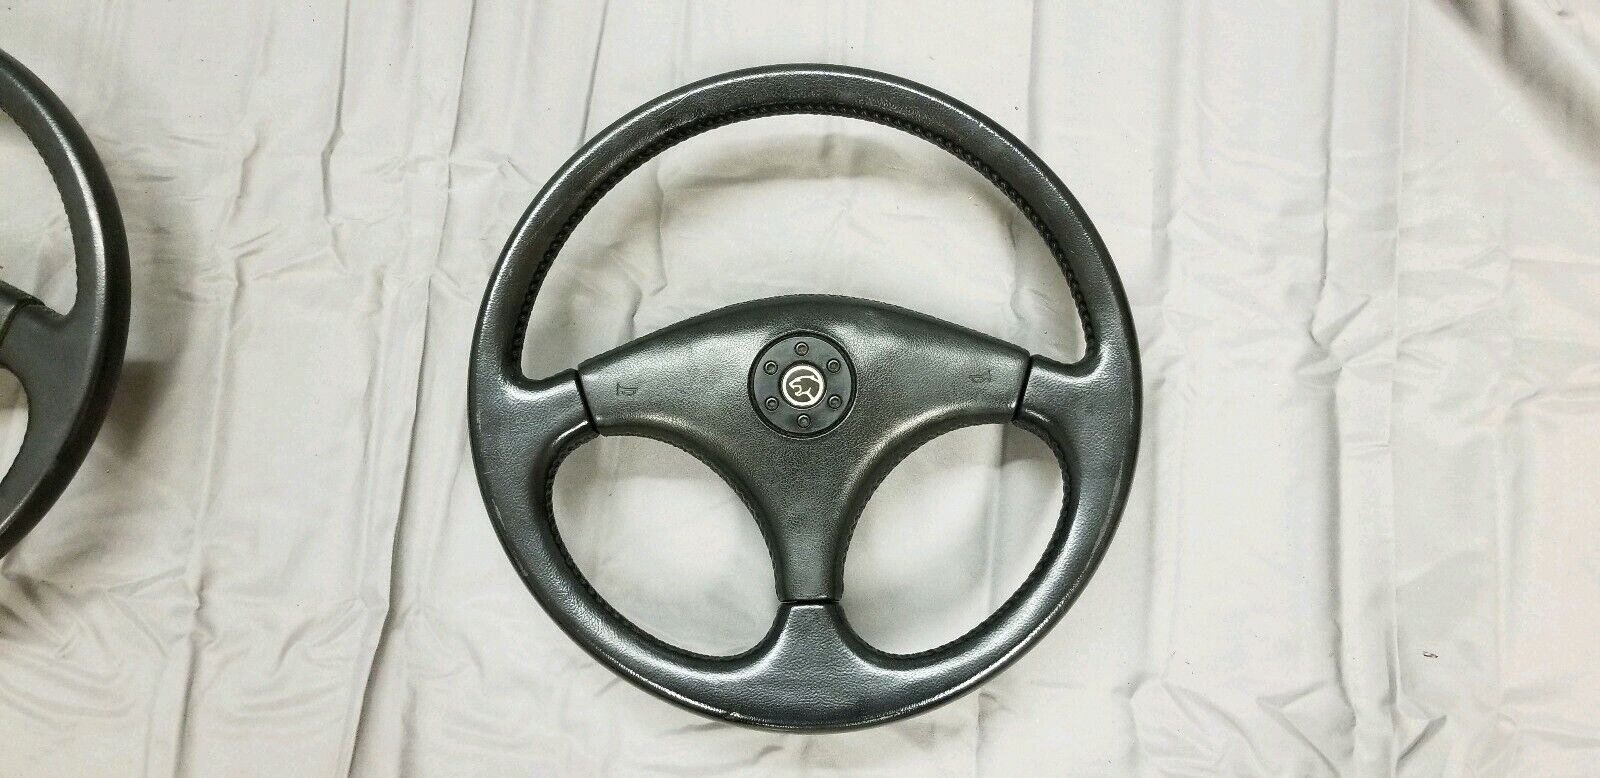 84-86 Capri rs Steering wheel leather wrapped mustang gt 3 spoke non cruise